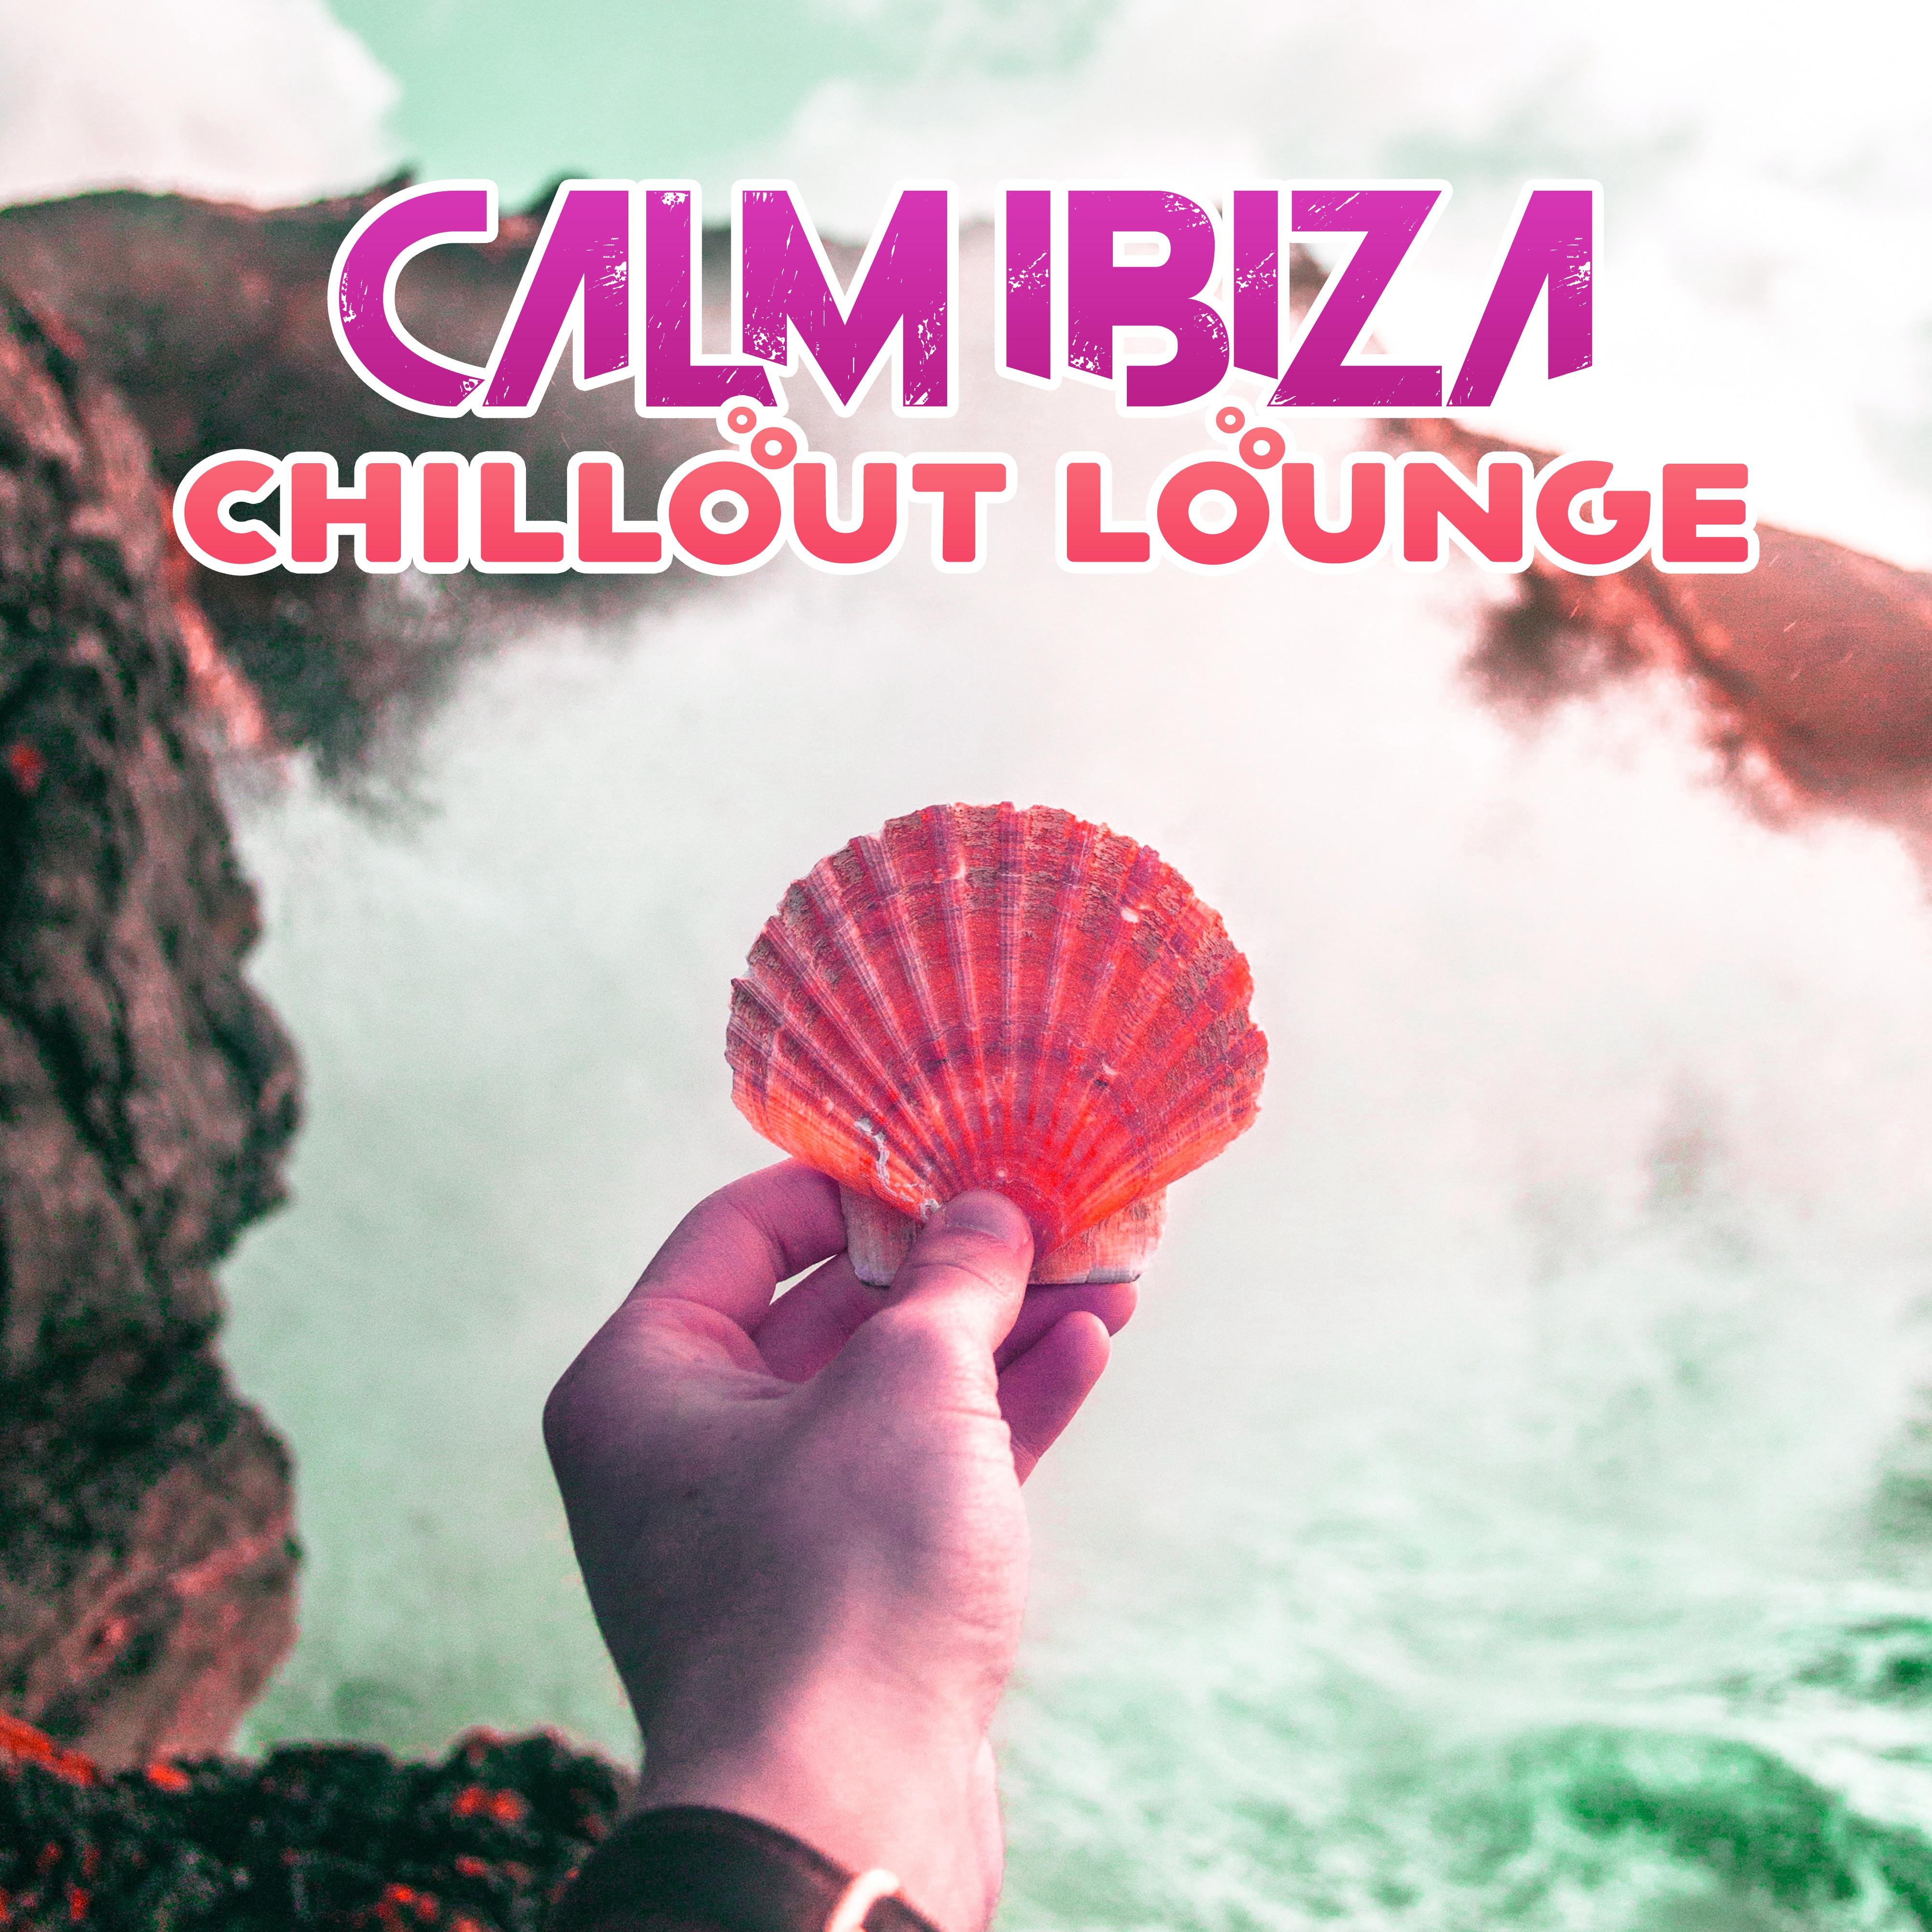 Calm Ibiza Chillout Lounge  Relaxing Time on the Beach, Summer Vibes, Chill Out 2017, Peaceful Music